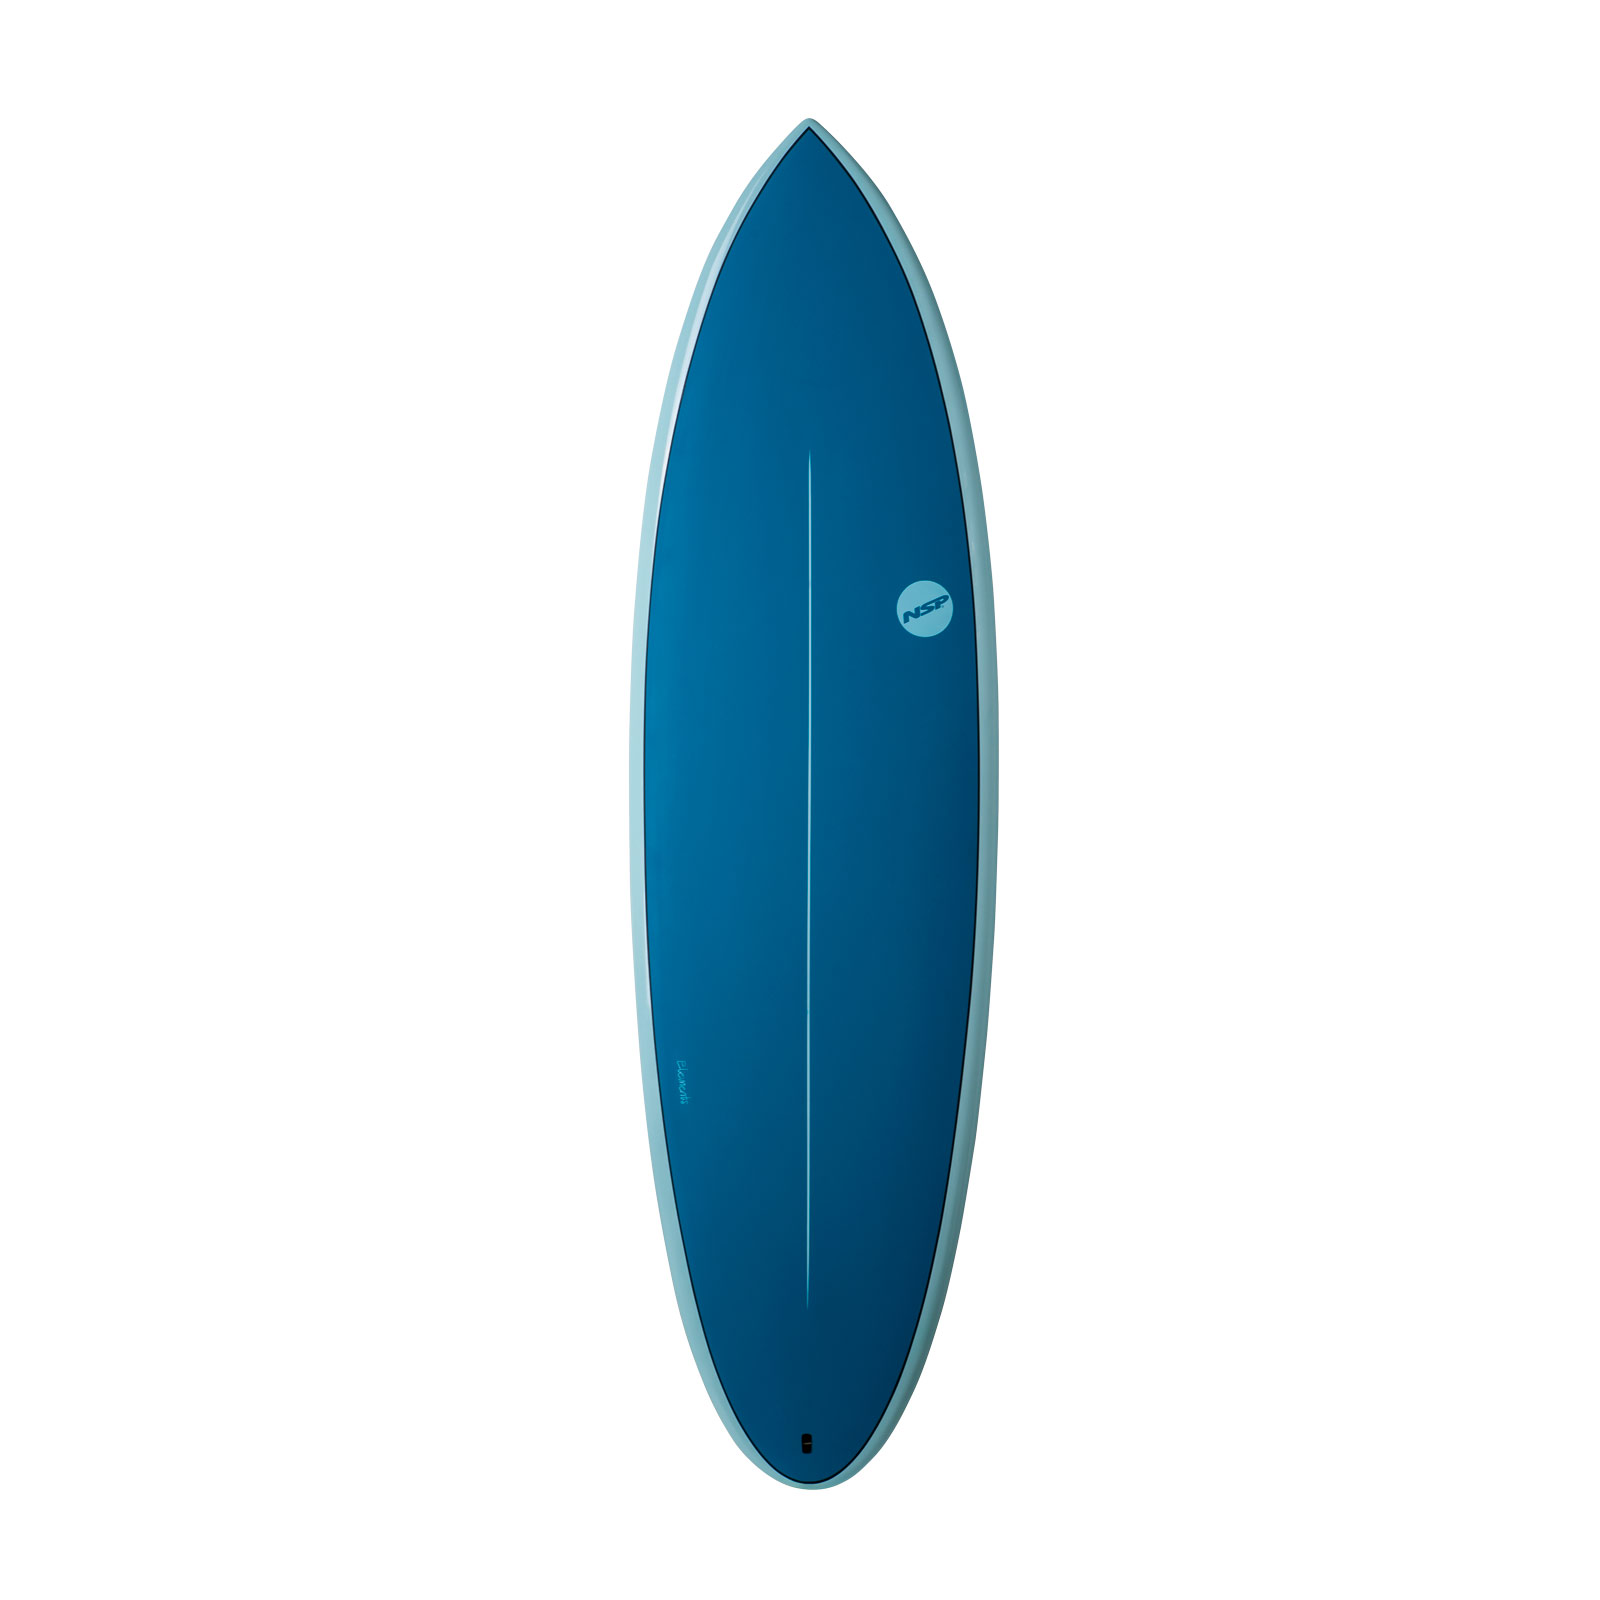 The Elements Hybrid Shaped By Nsp Surfboards